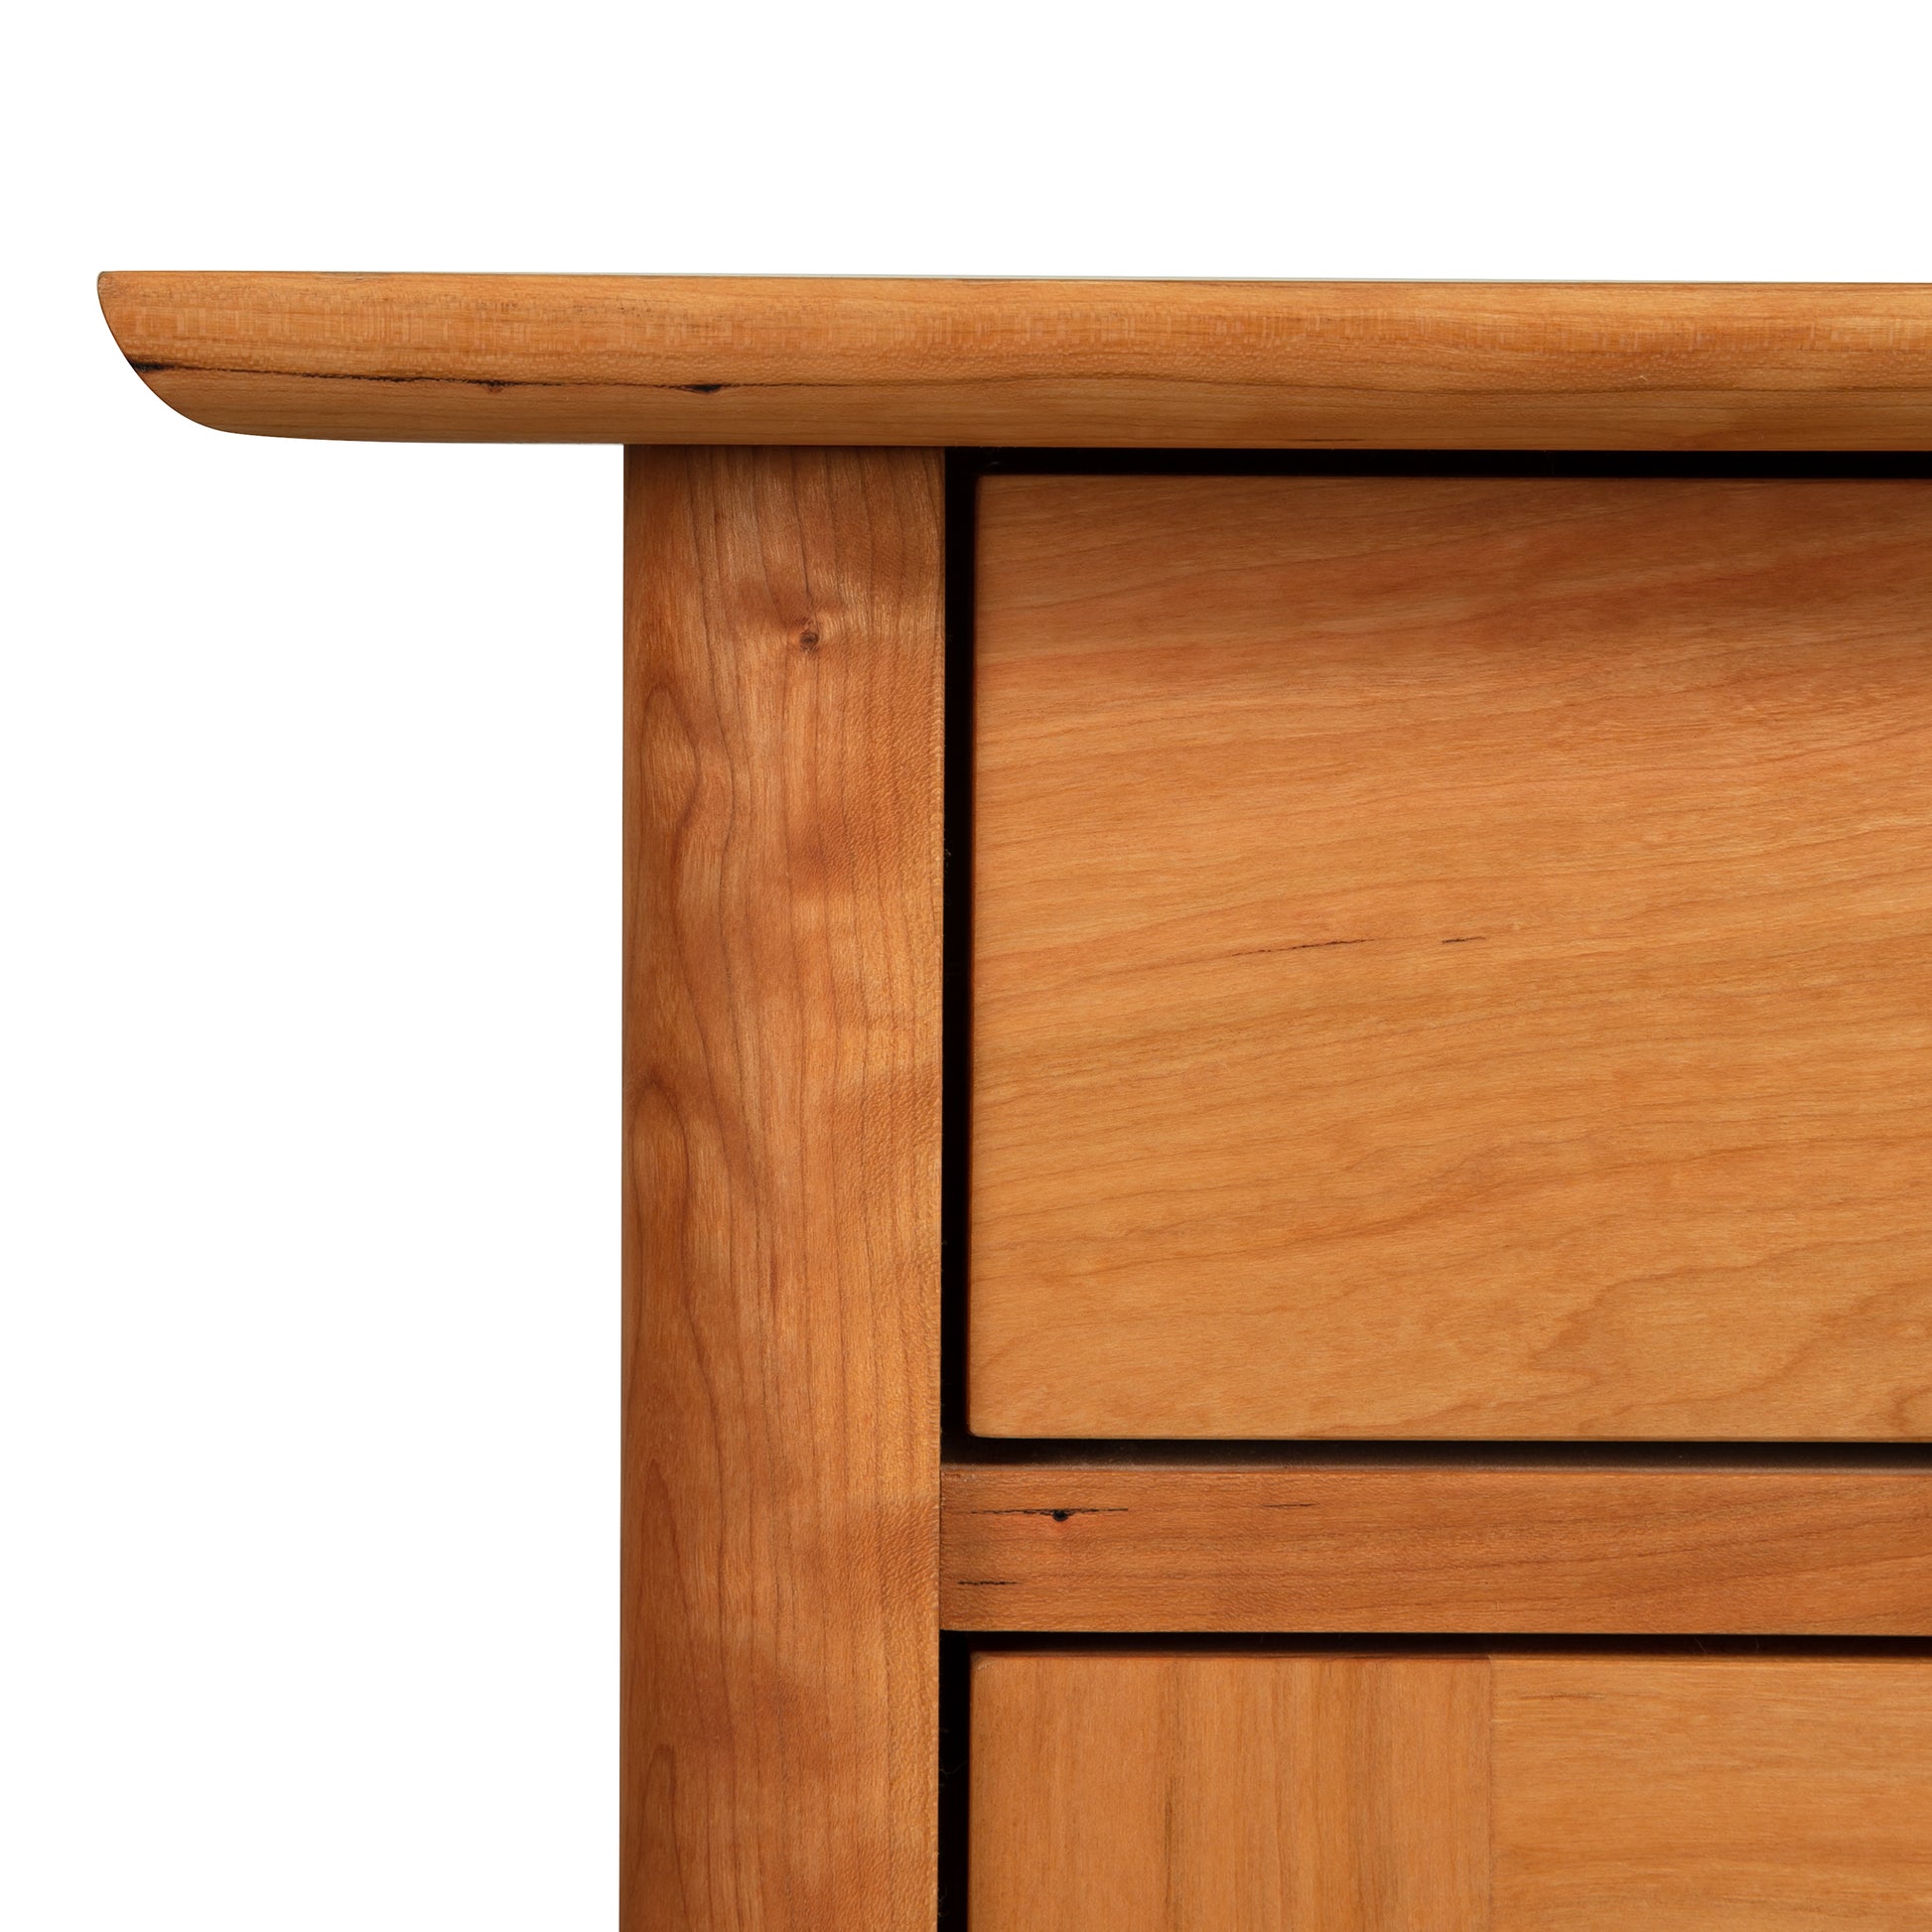 Close-up of a Vermont Furniture Designs Heartwood Shaker 1-Drawer Nightstand with Door corner showing the wood grain and joinery details against a white background.